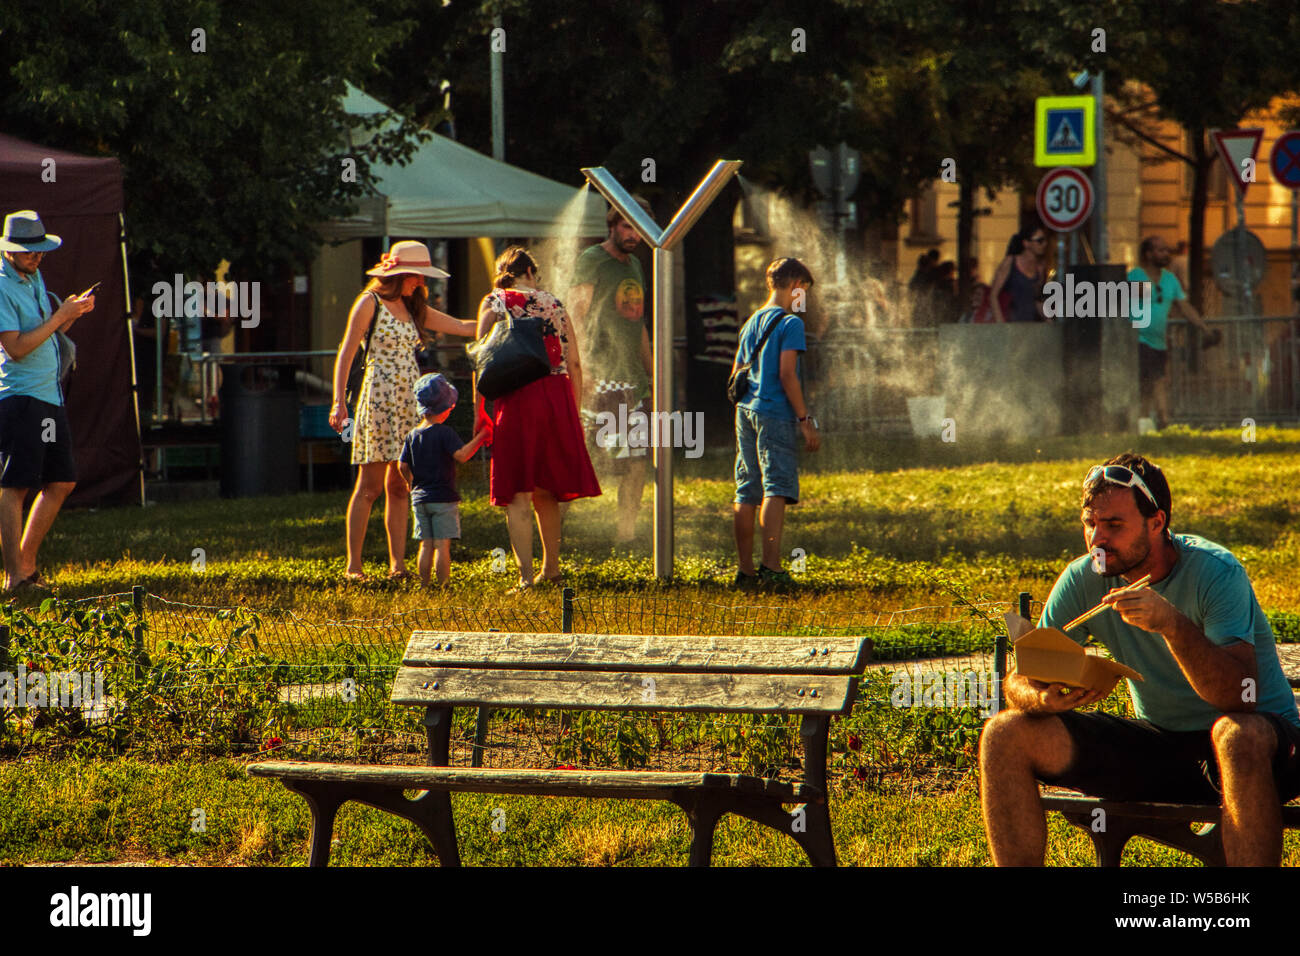 Prague, July 27 2019. People cools down sun in public mist machina at Park under Europe heat wave Stock Photo